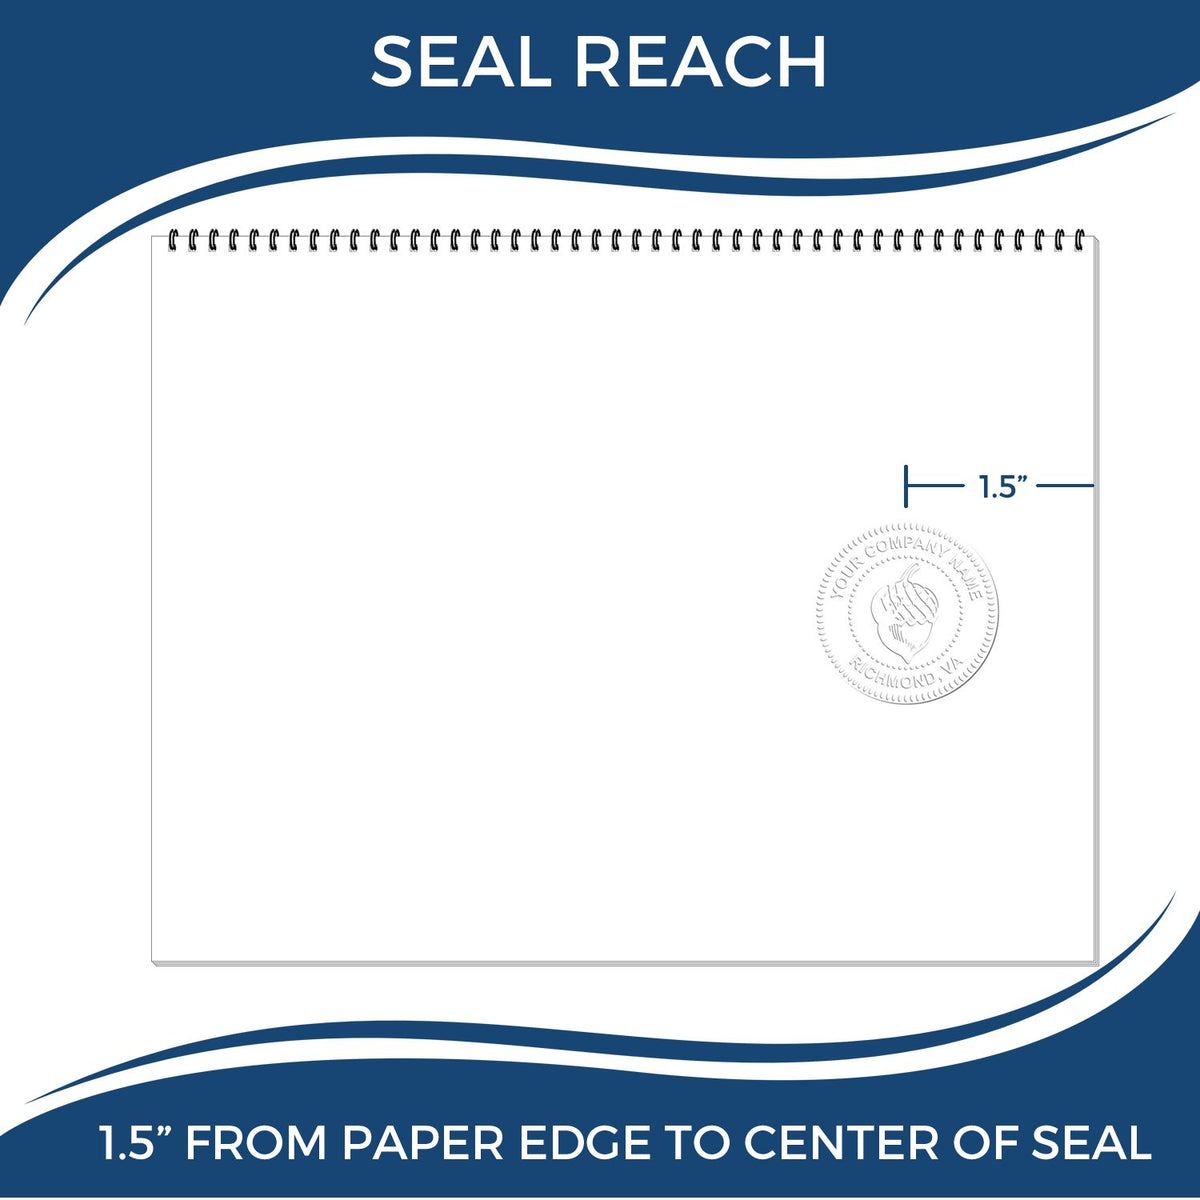 An infographic showing the seal reach which is represented by a ruler and a miniature seal image of the Hybrid Connecticut Land Surveyor Seal